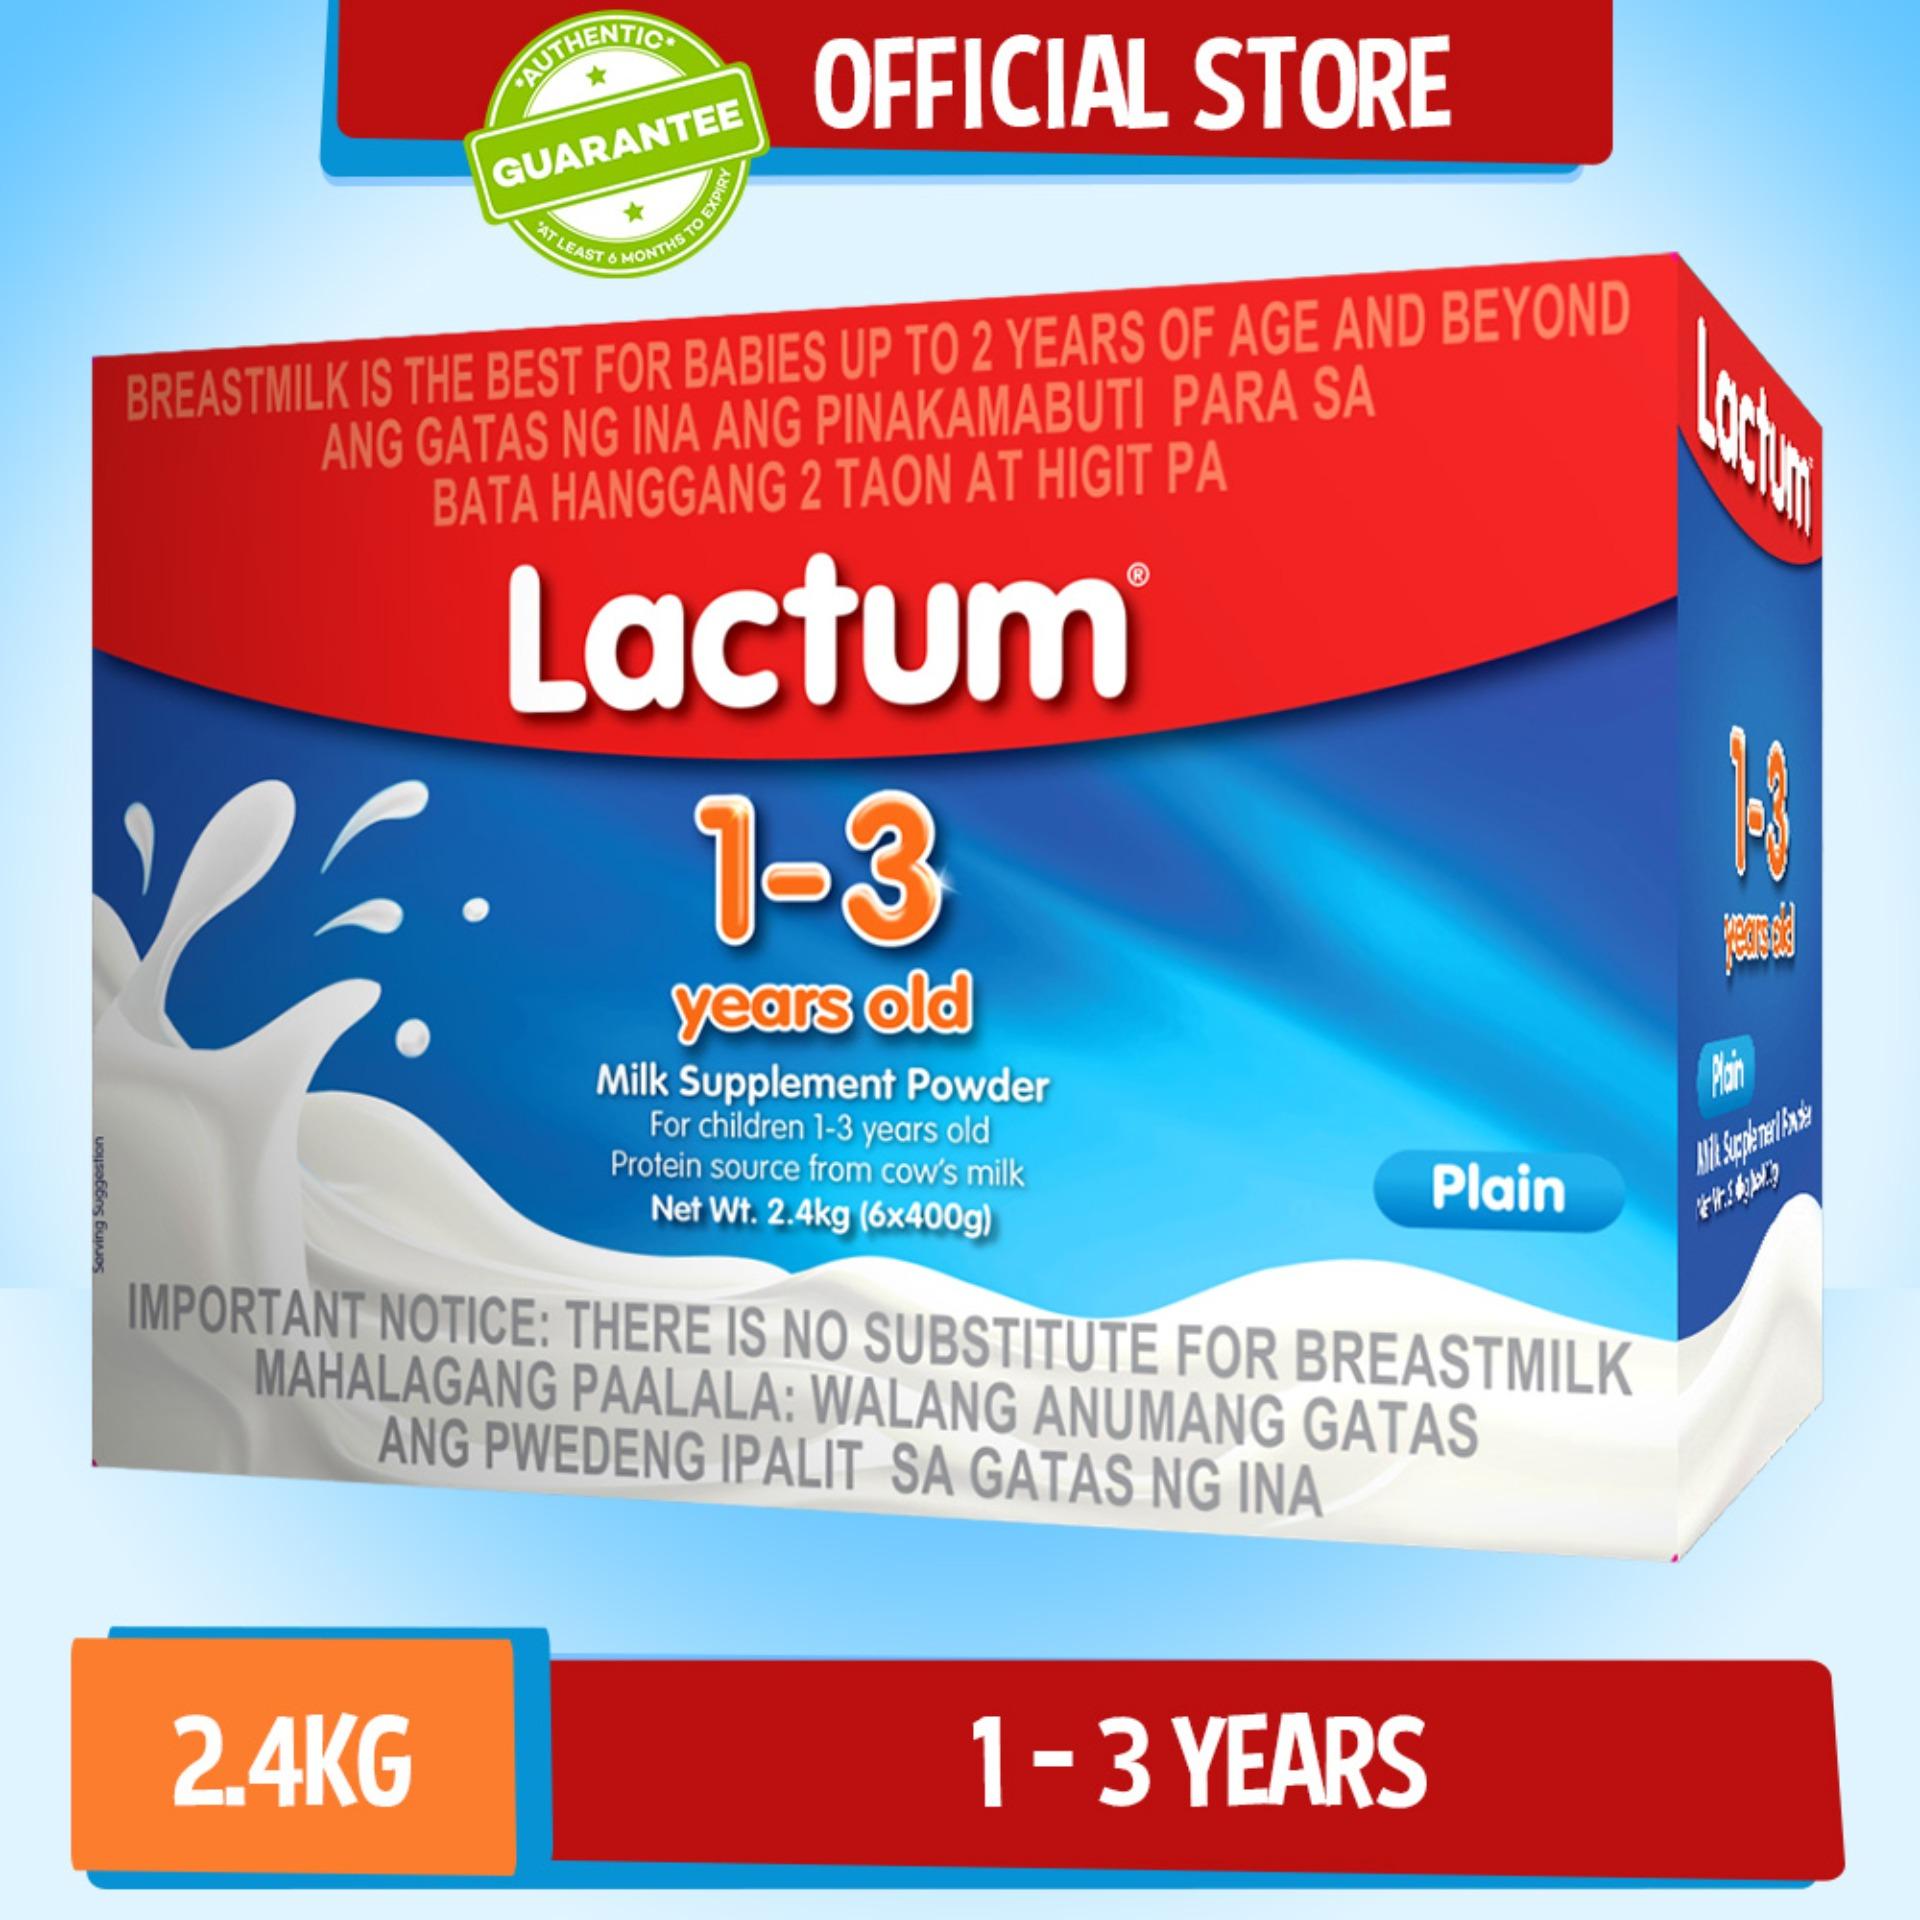 Lactum for 1-3 Years Old 2.4kg: Buy 